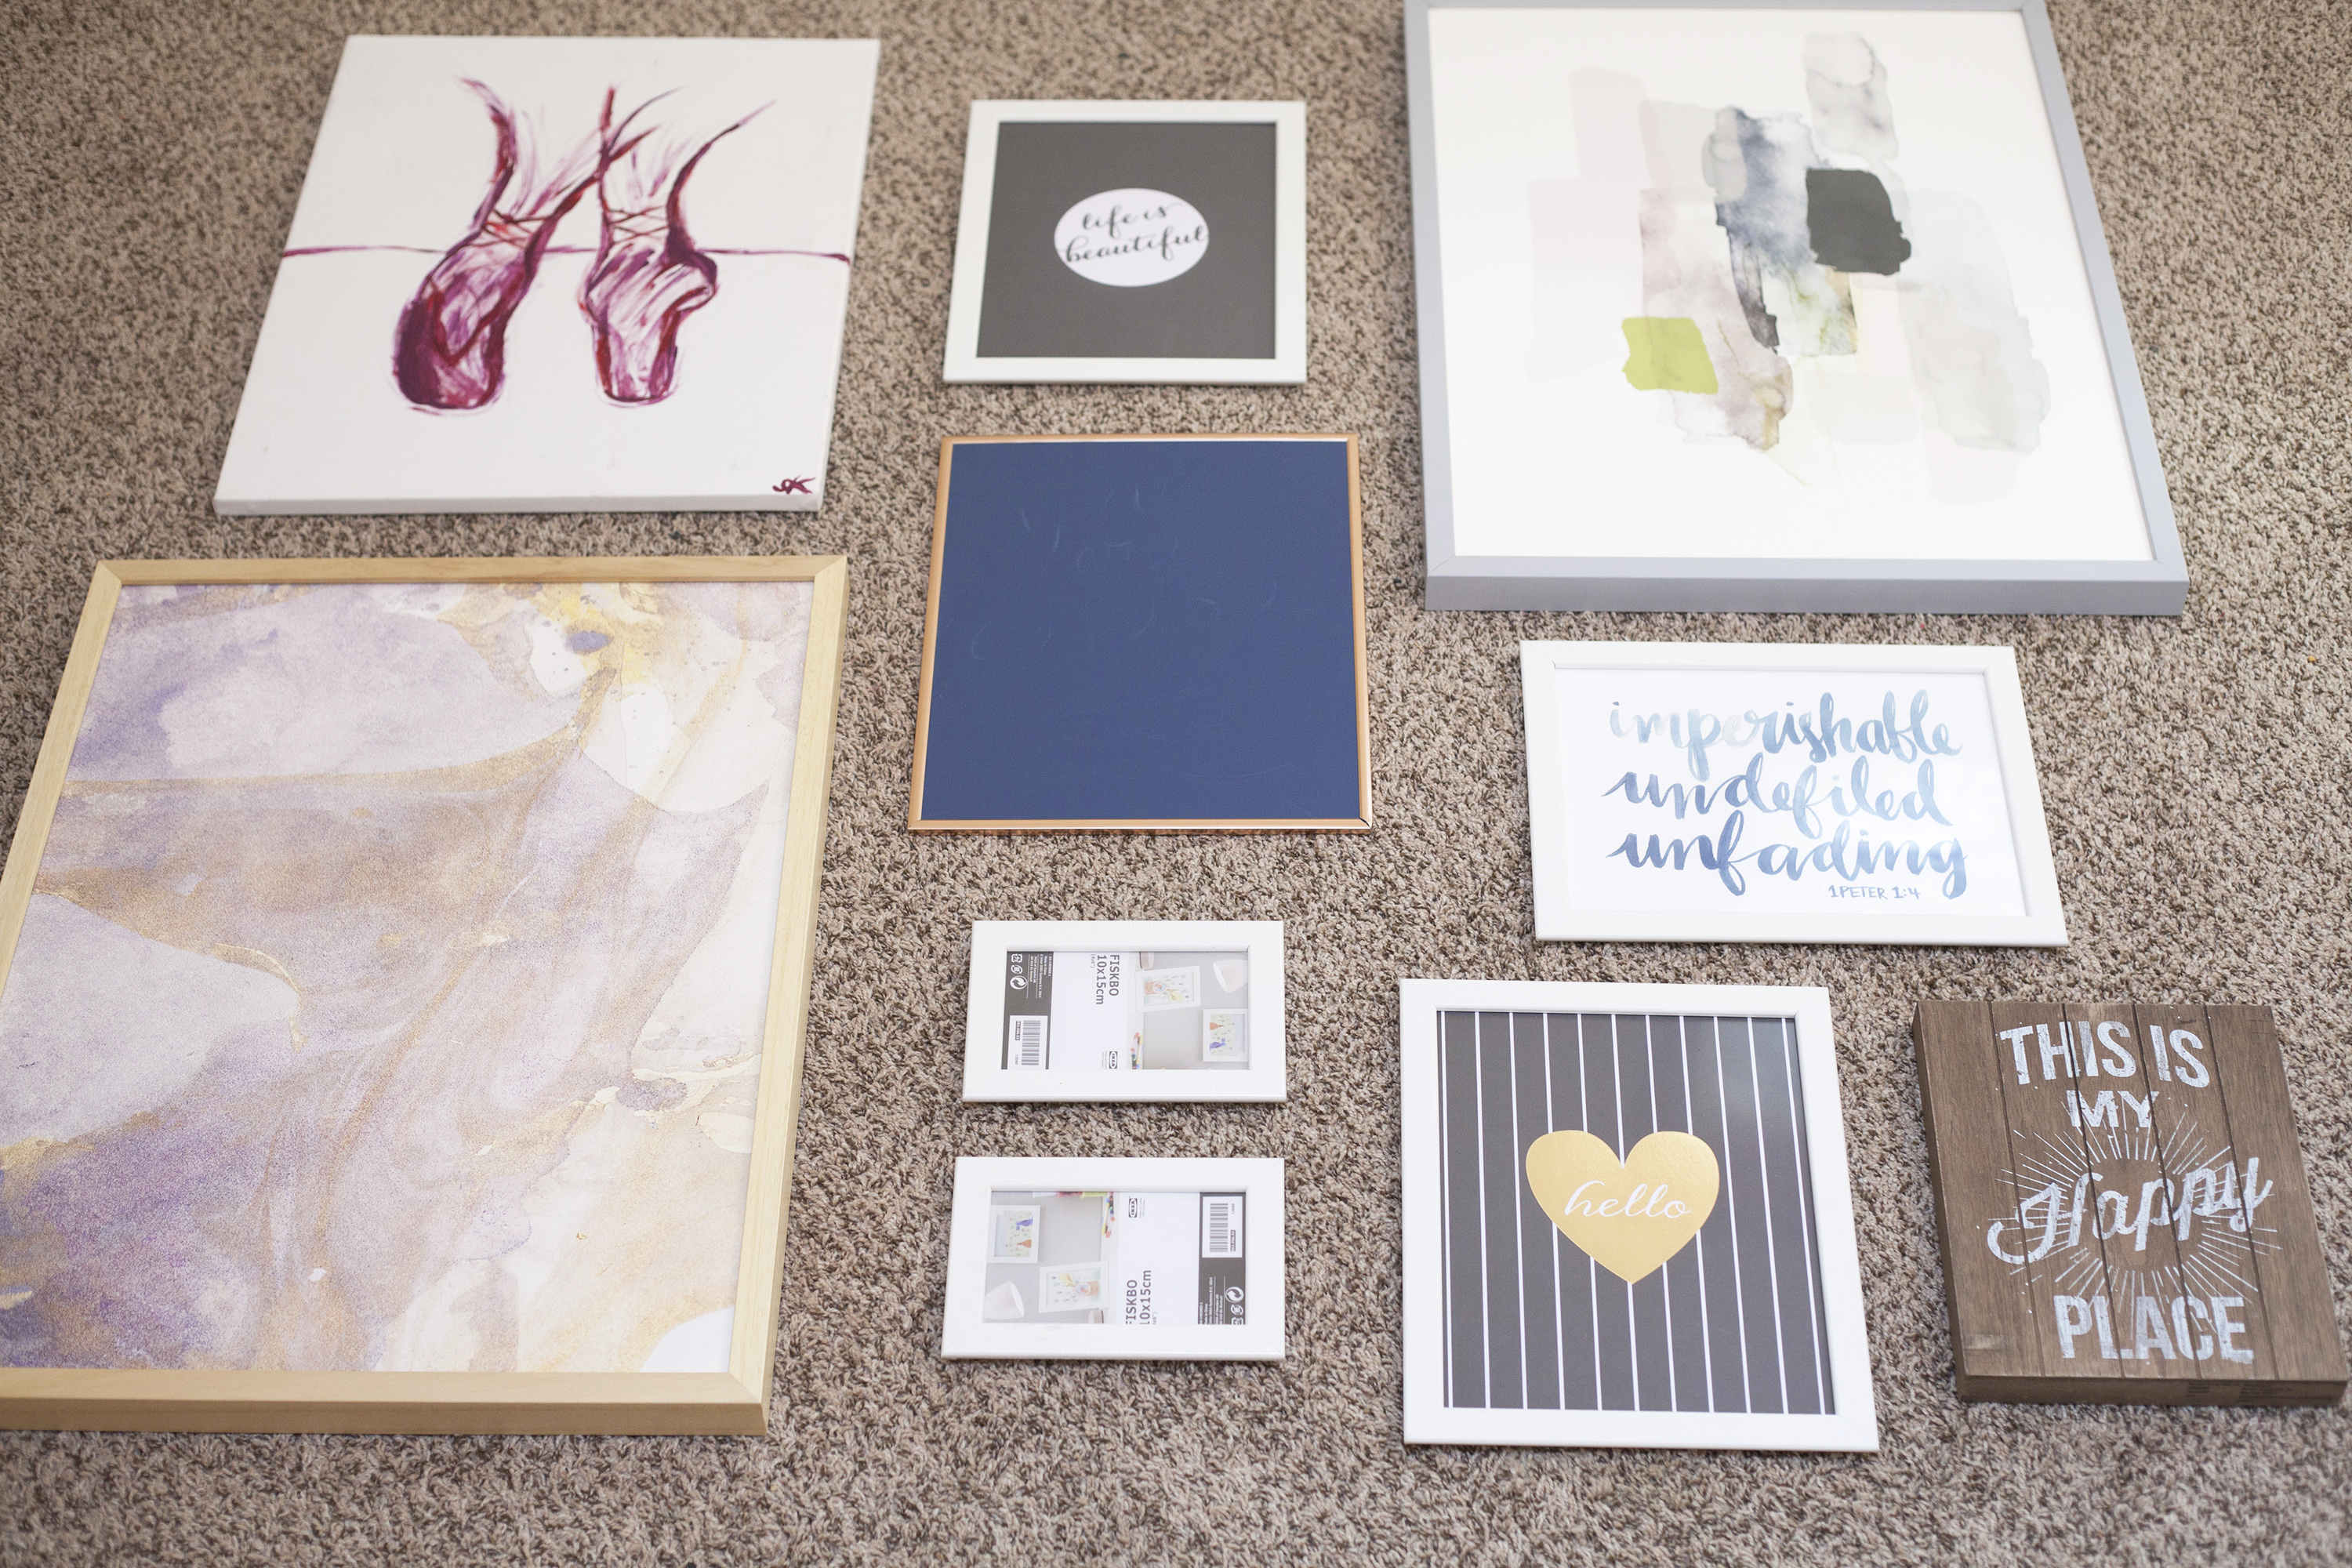 How To Create A Gallery Wall | Coffee With Summer